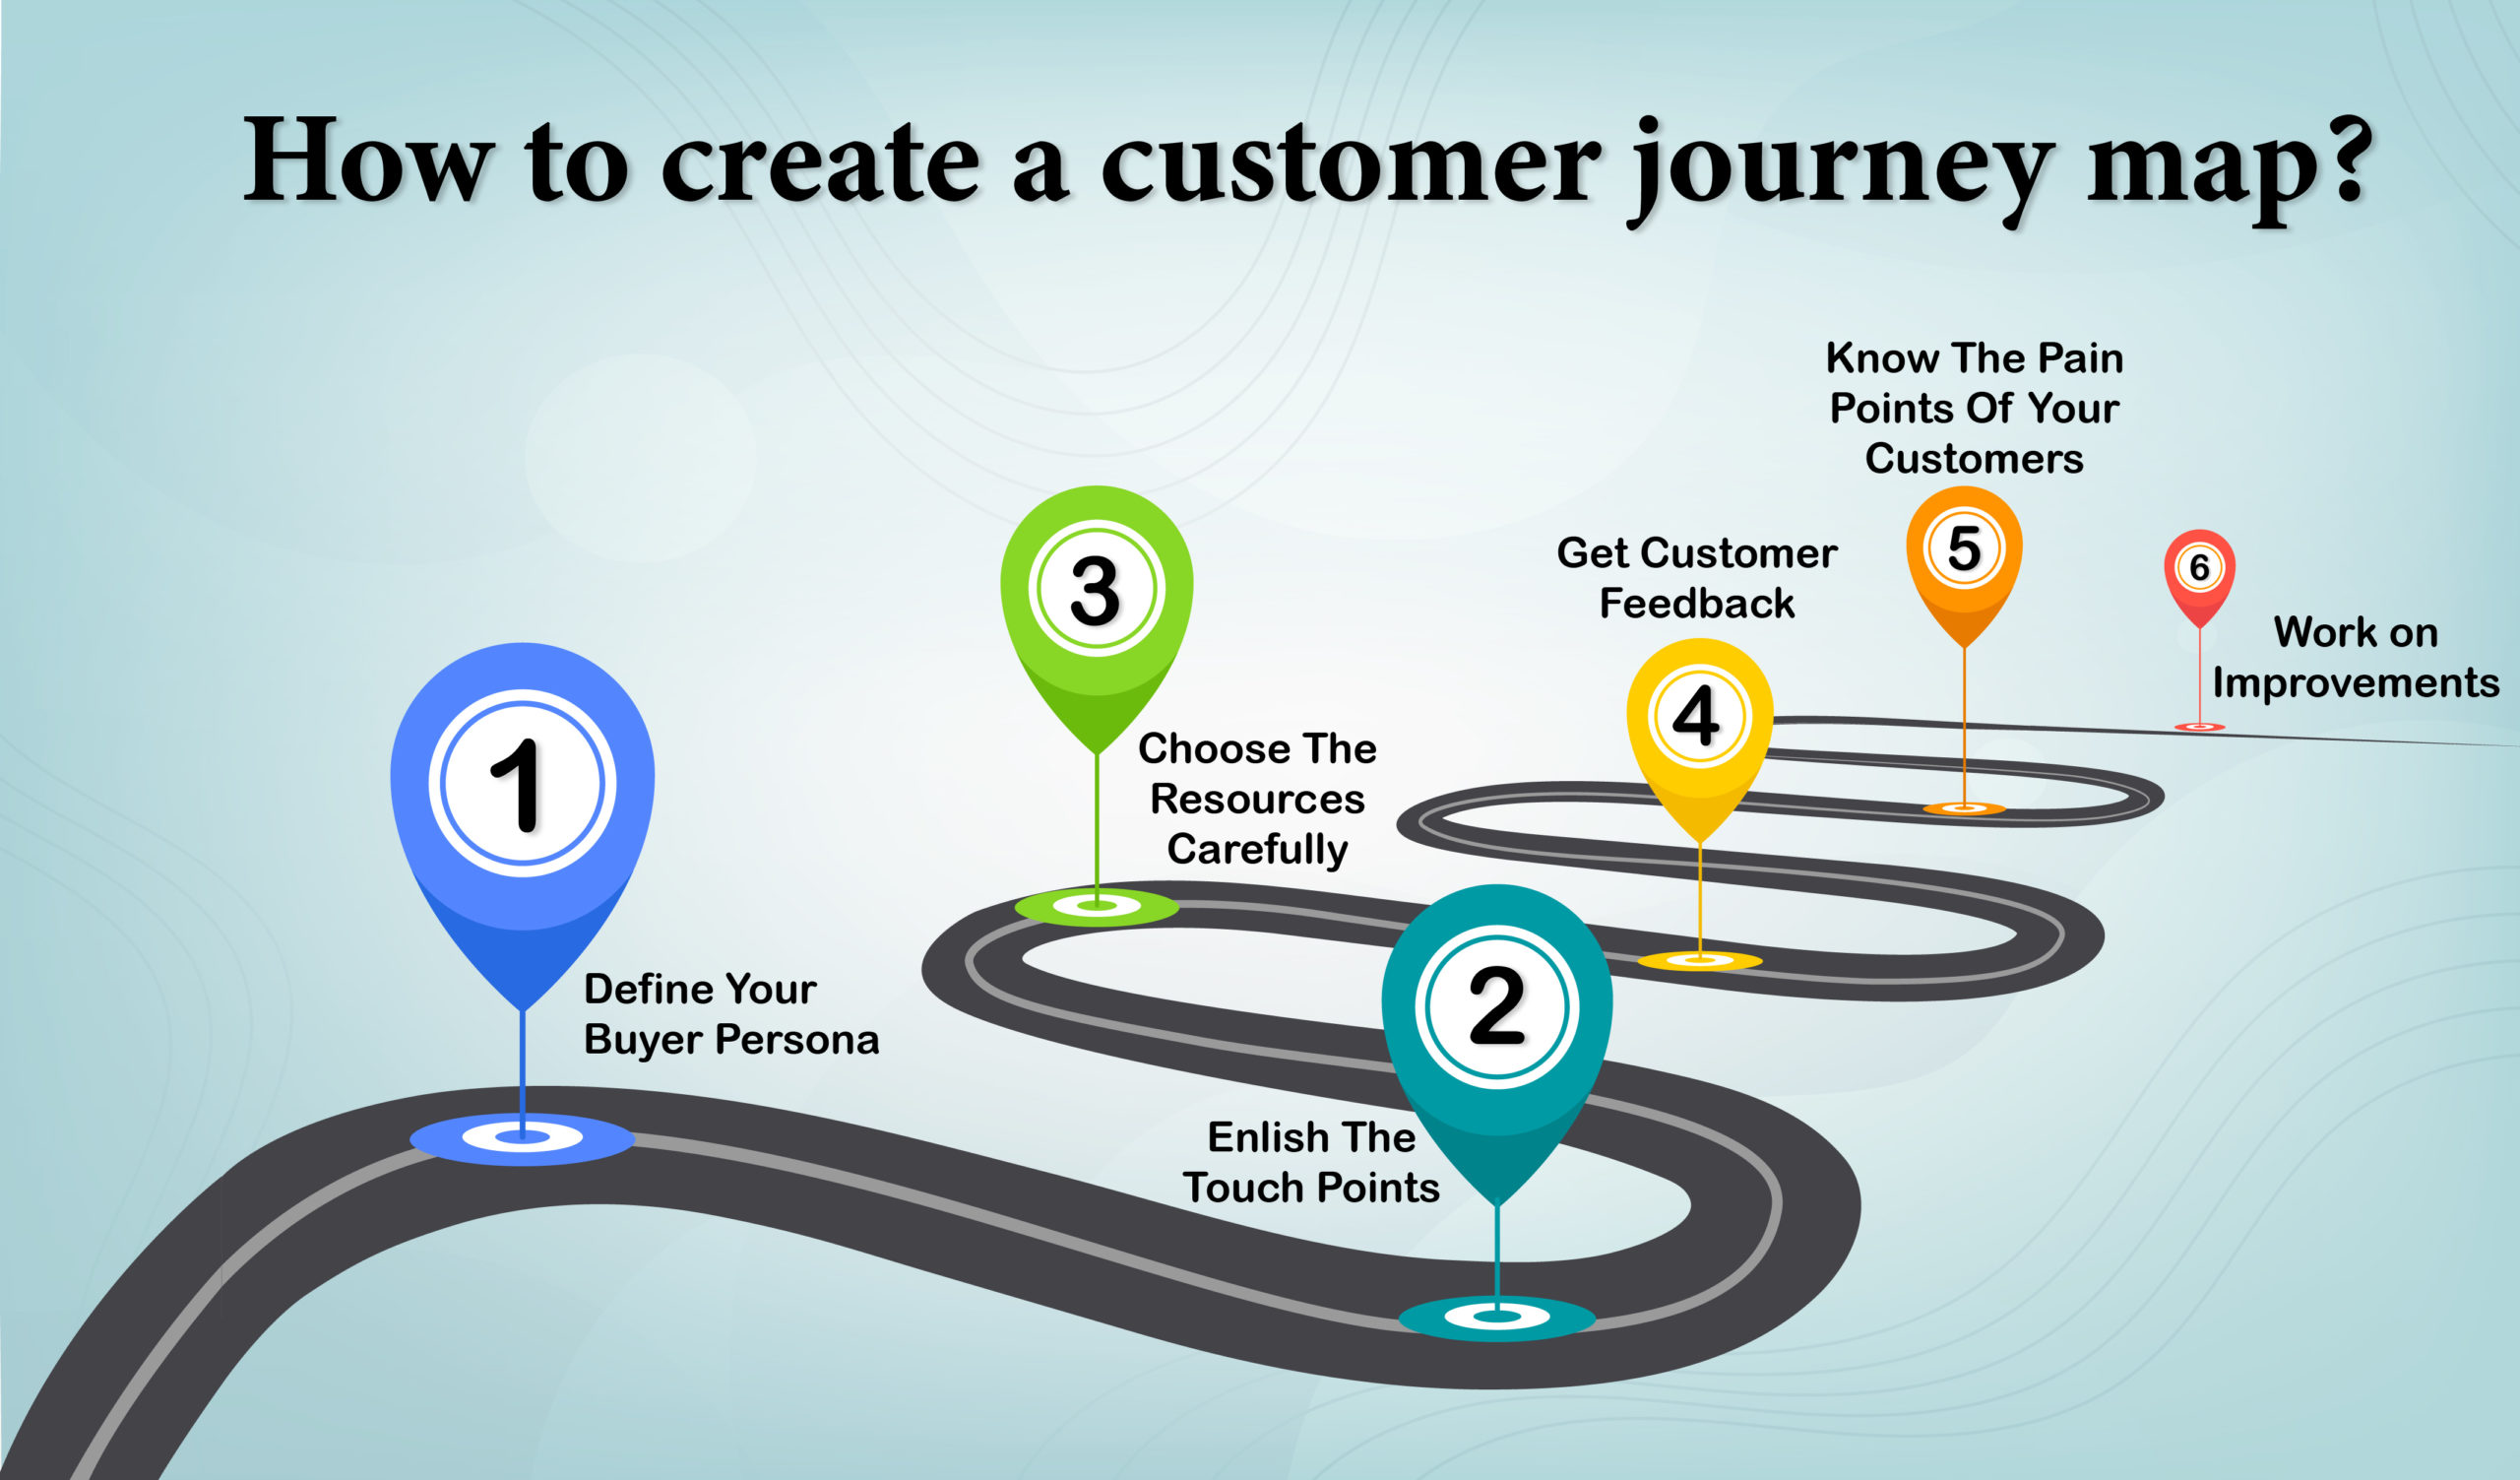 How to Create a Customer Journey Map?